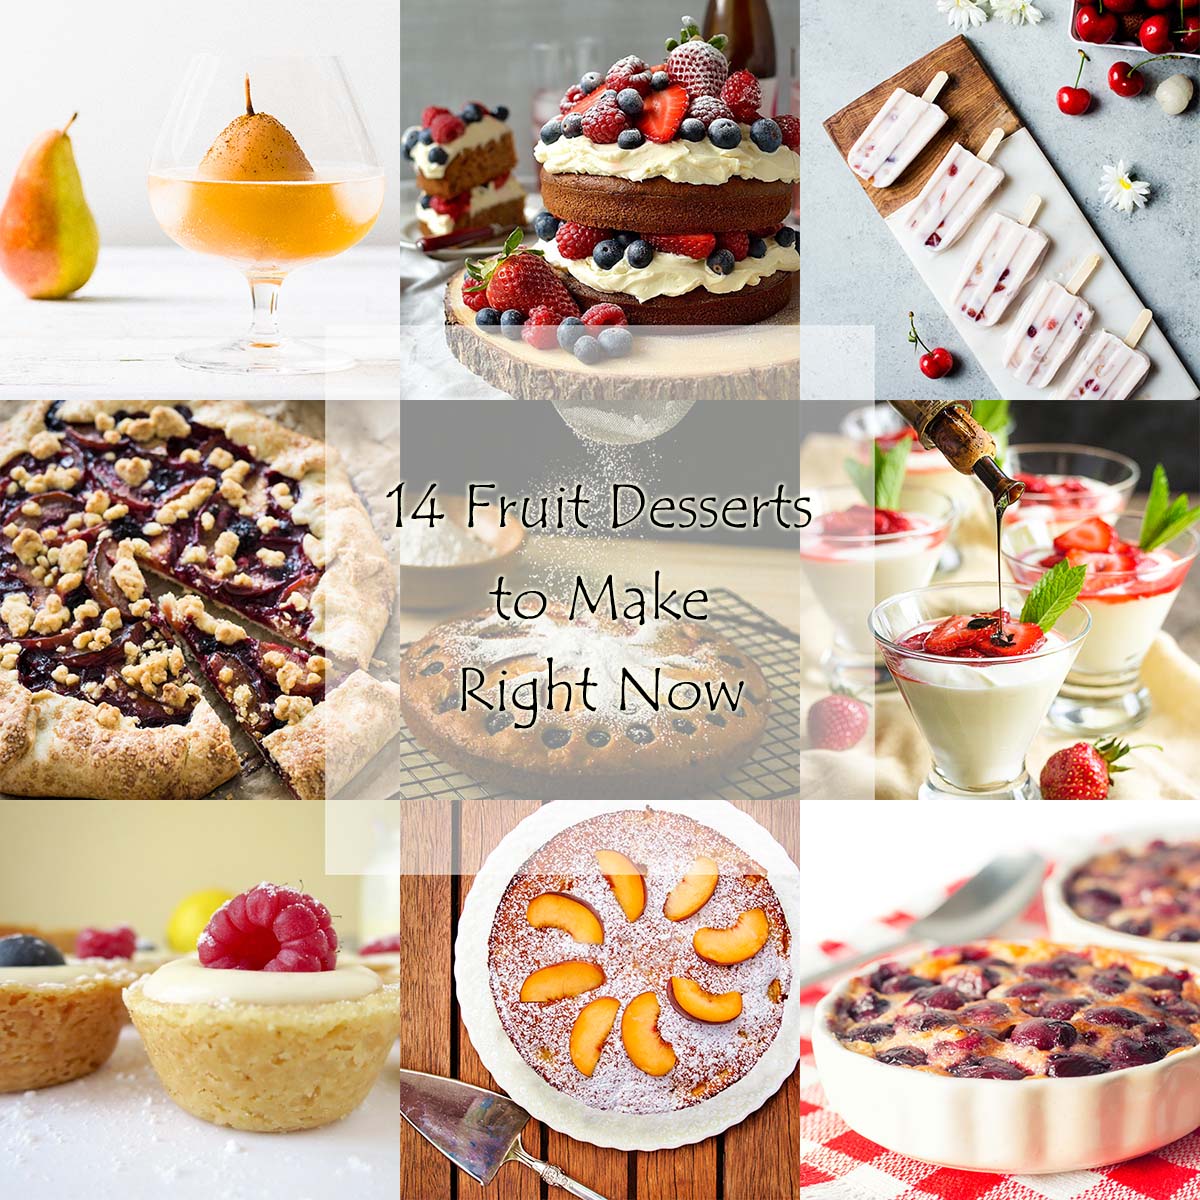 Fruit Desserts Roundup - A wide variety of fresh and yummy recipes for summer fruit desserts, such as cakes, tarts, jam, popsicles, and more, are featured in this recipe roundup. | justalittlebitofbacon.com